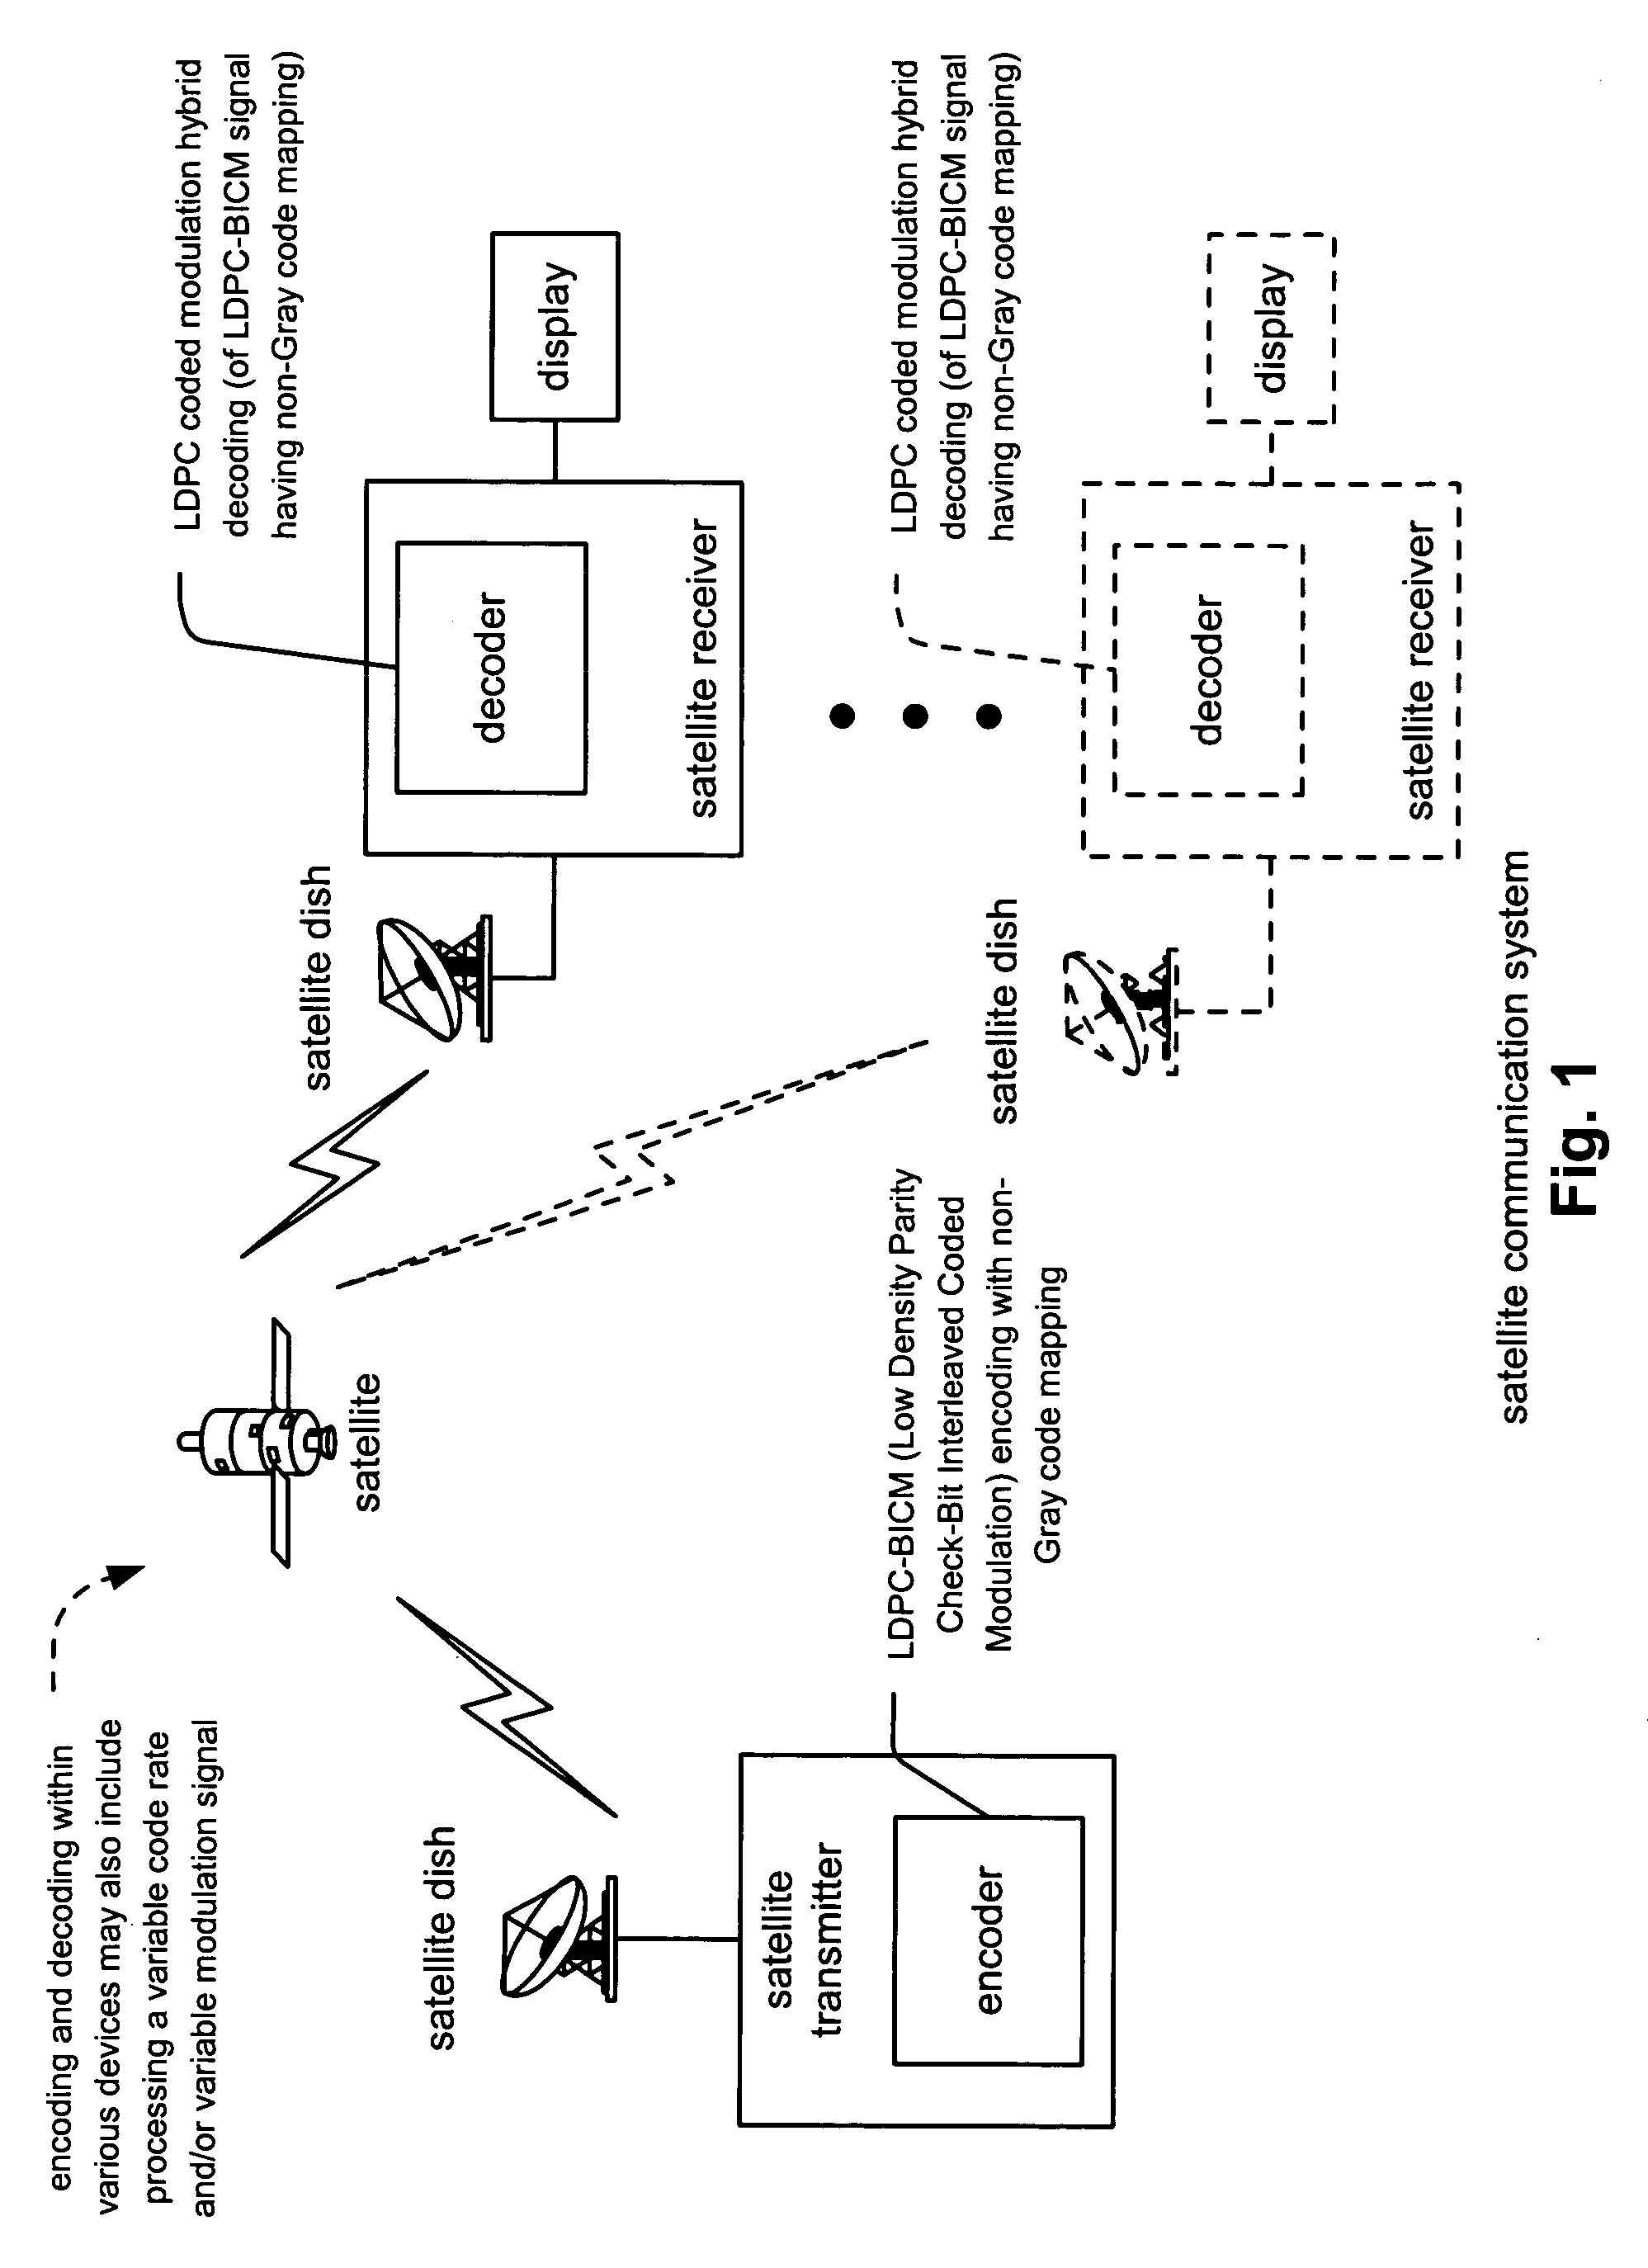 LDPC (Low Density Parity Check) coded modulation hybrid decoding using non-Gray code maps for improved performance